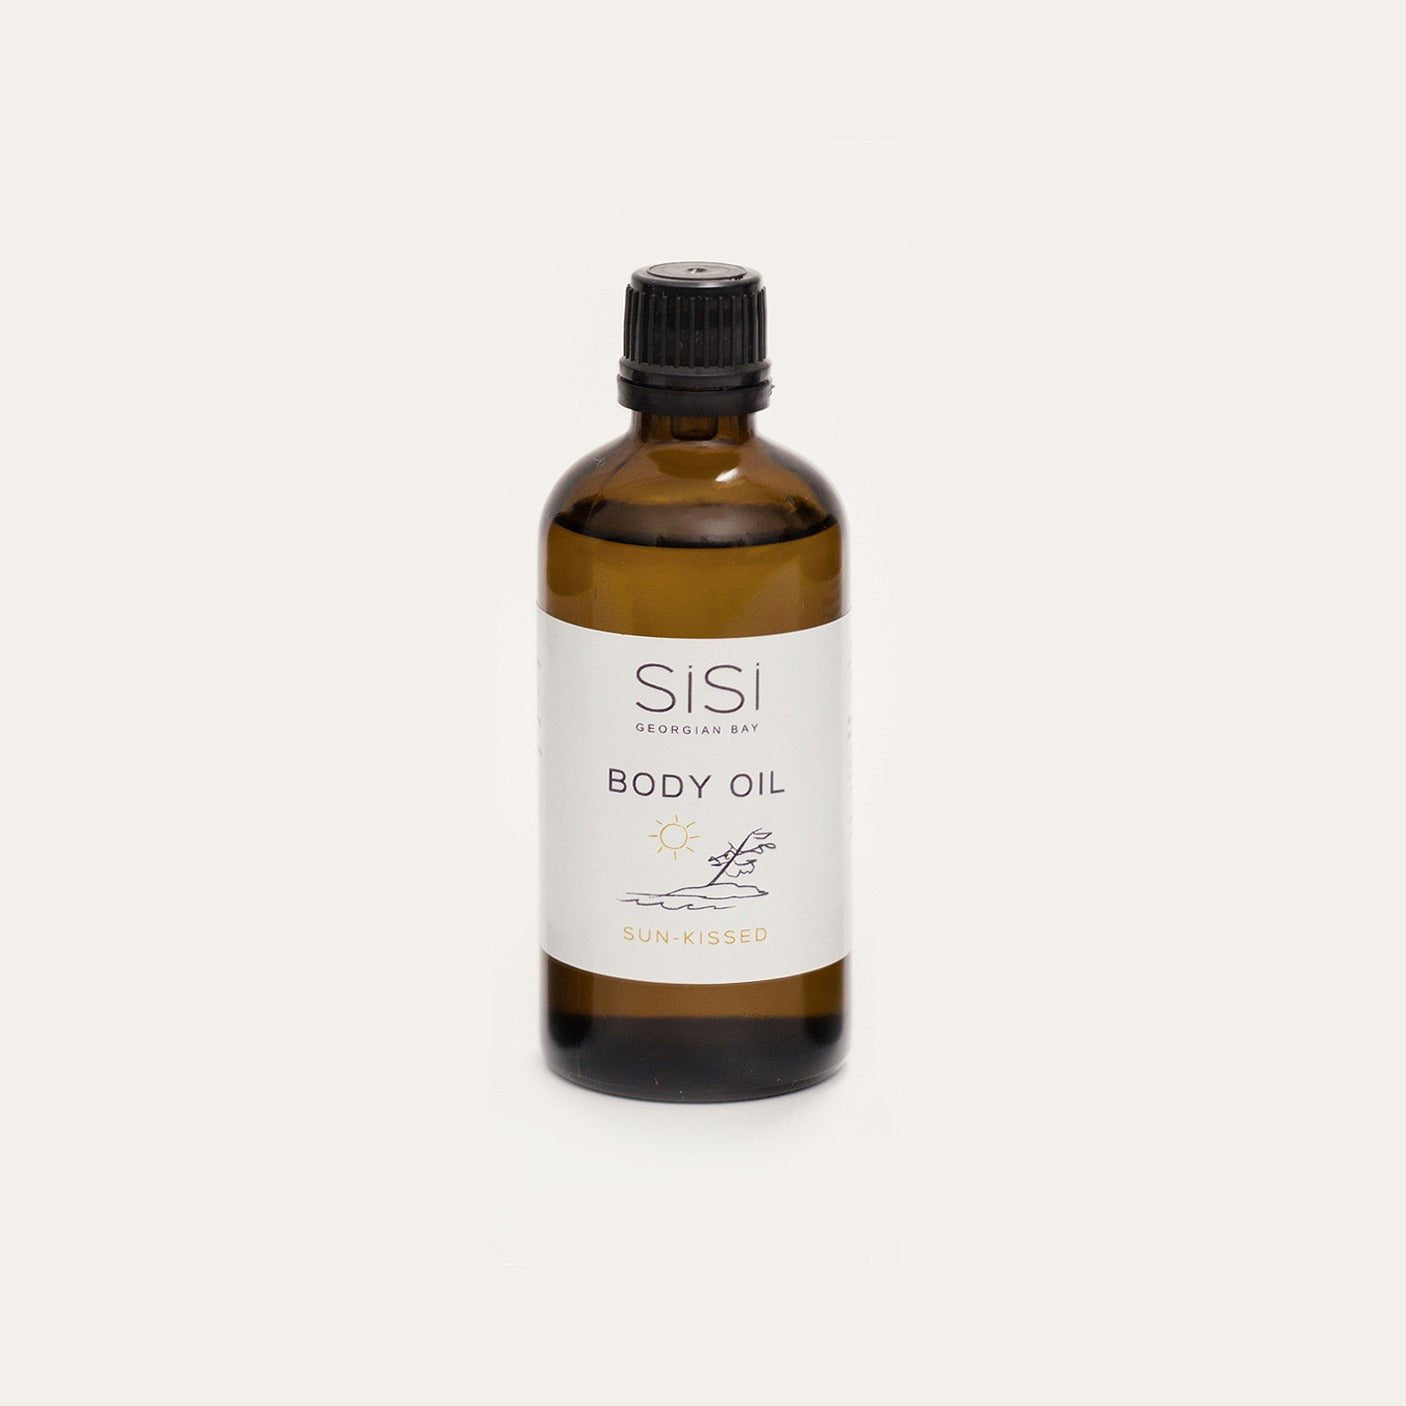 Sunkissed body oil in a 4oz amber glass bottle on a creamy white background